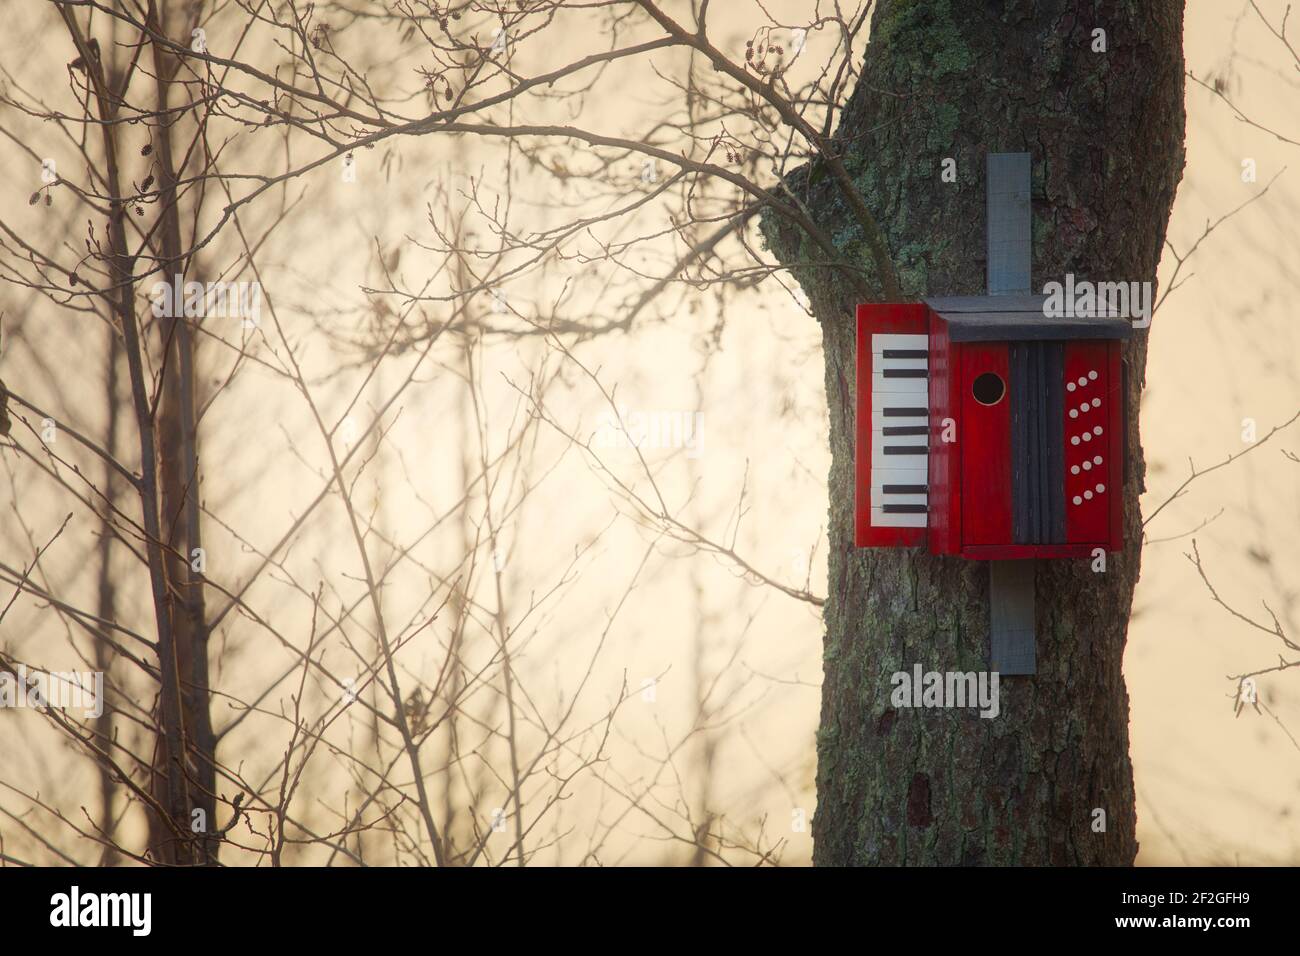 Unusual wooden birdbox in shape of piano keyboard attached to tree in forest. Concept of nature, different, unusual, creativity Stock Photo